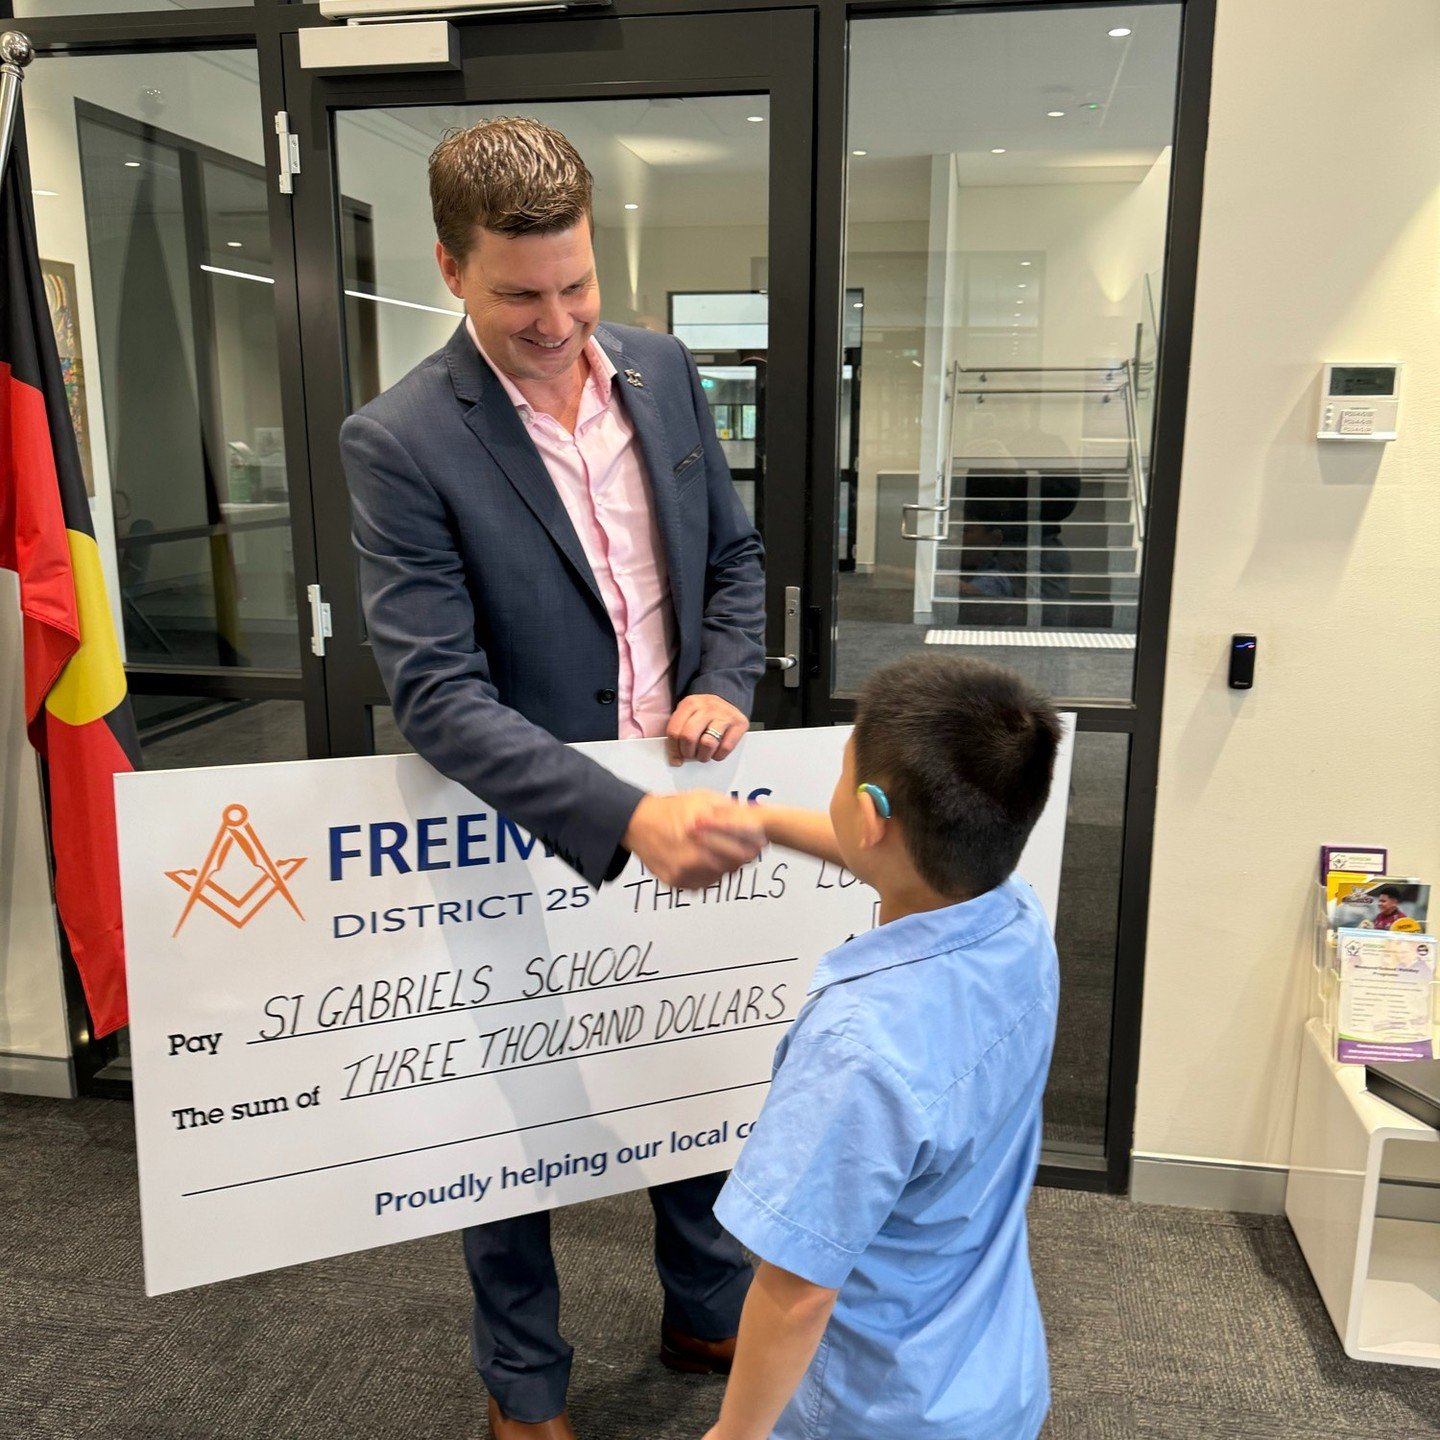 We received a very generous donation for Hill Lodge earlier this year of $6000 to help us purchase some new signage for Old Northern Road, and then this week they came in to present us with a cheque and surprised us with an extra $3000 on top of that